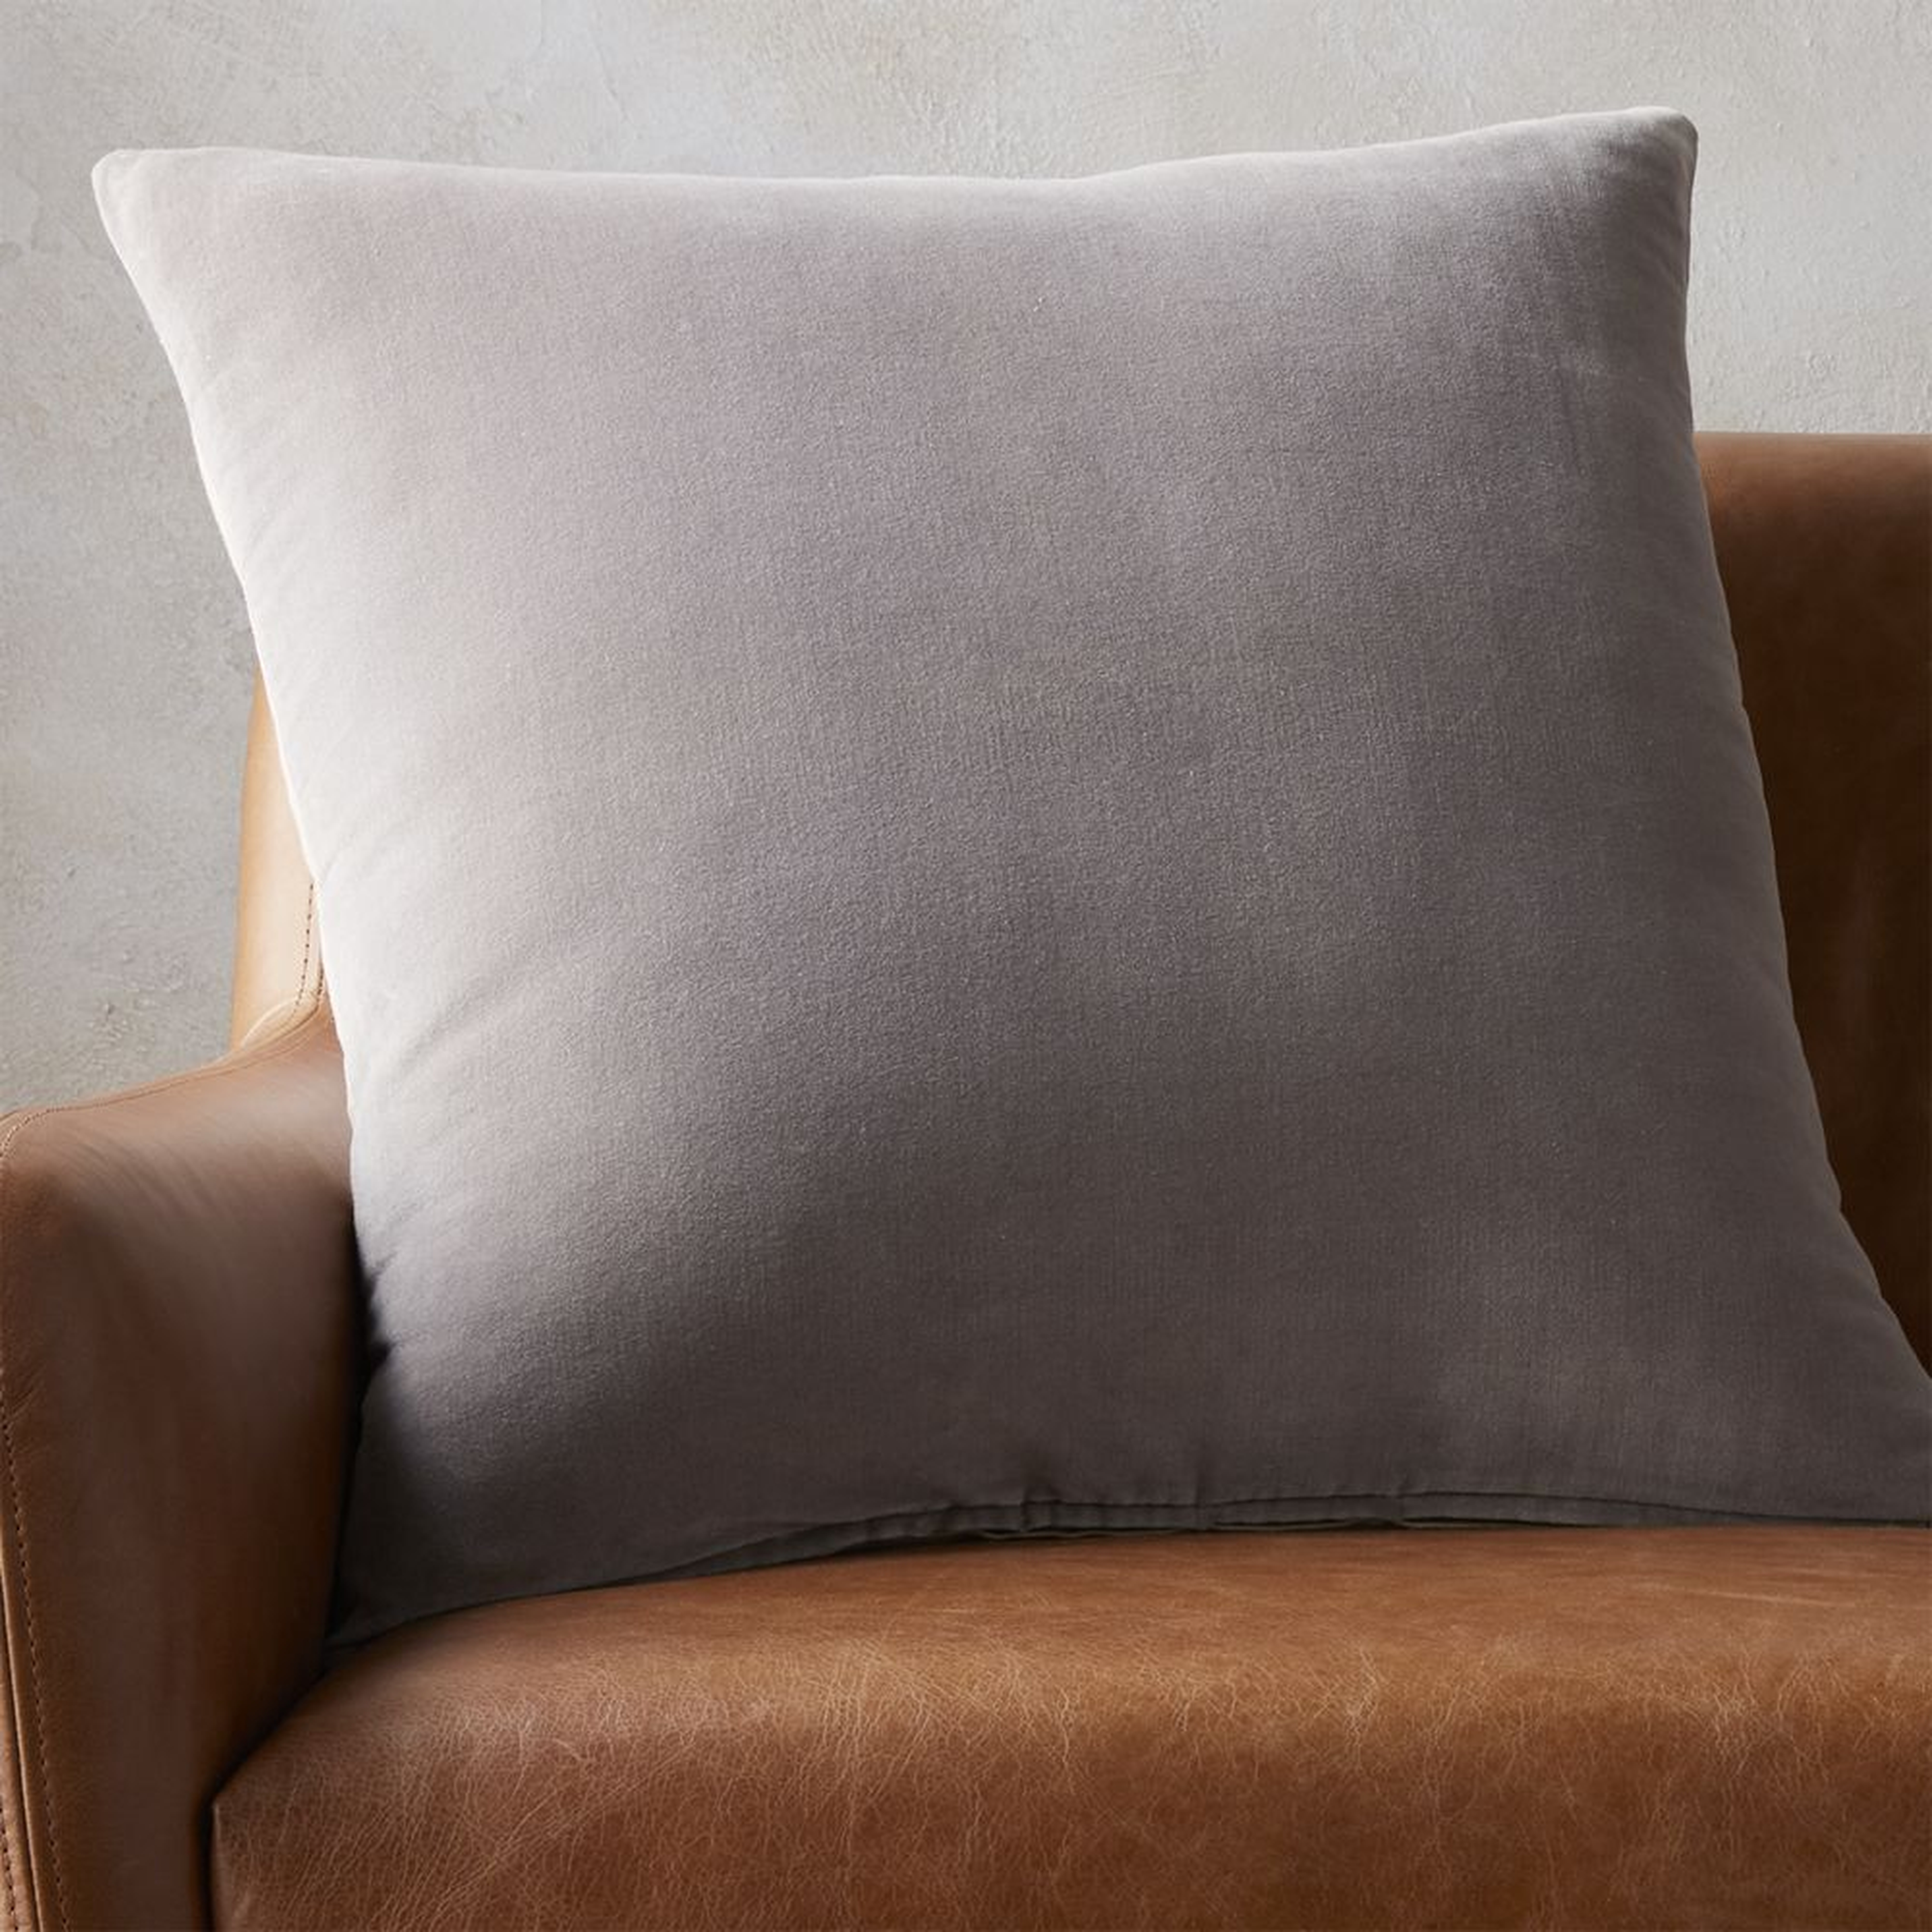 "23"" leisure grey pillow with feather-down insert" - CB2